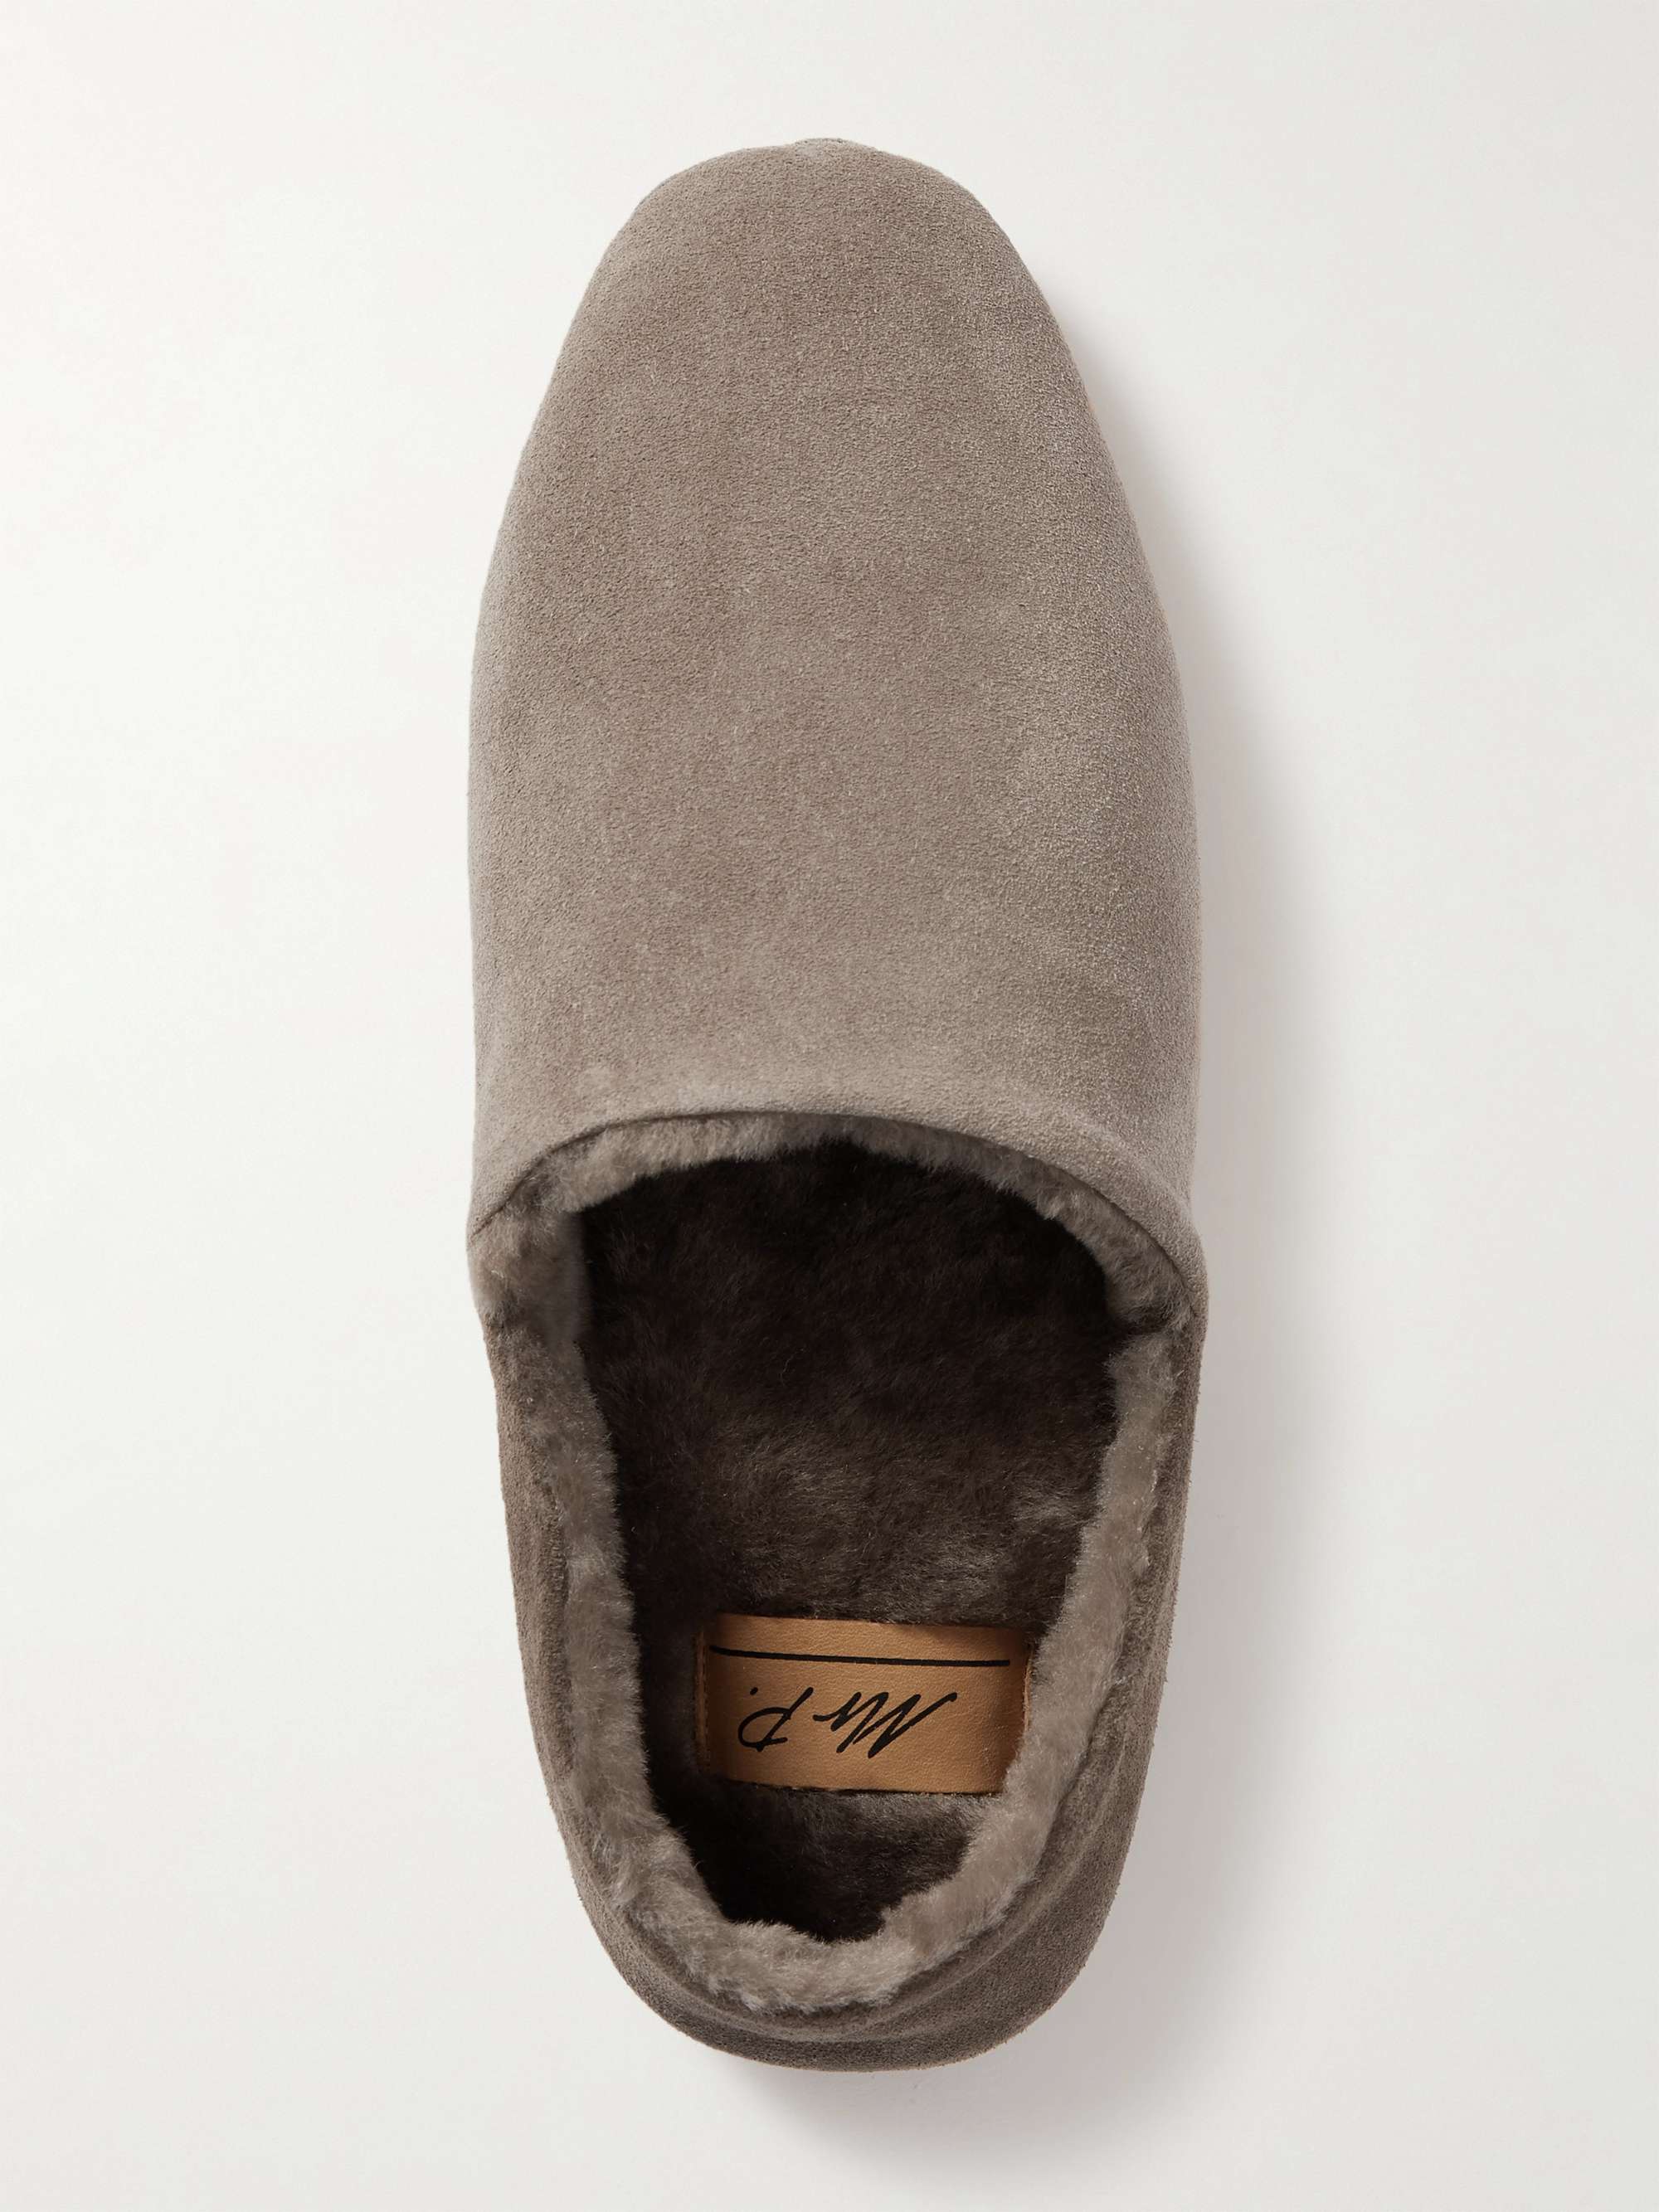 MR P. Collapsible-Heel Shearling-Lined Suede Slippers